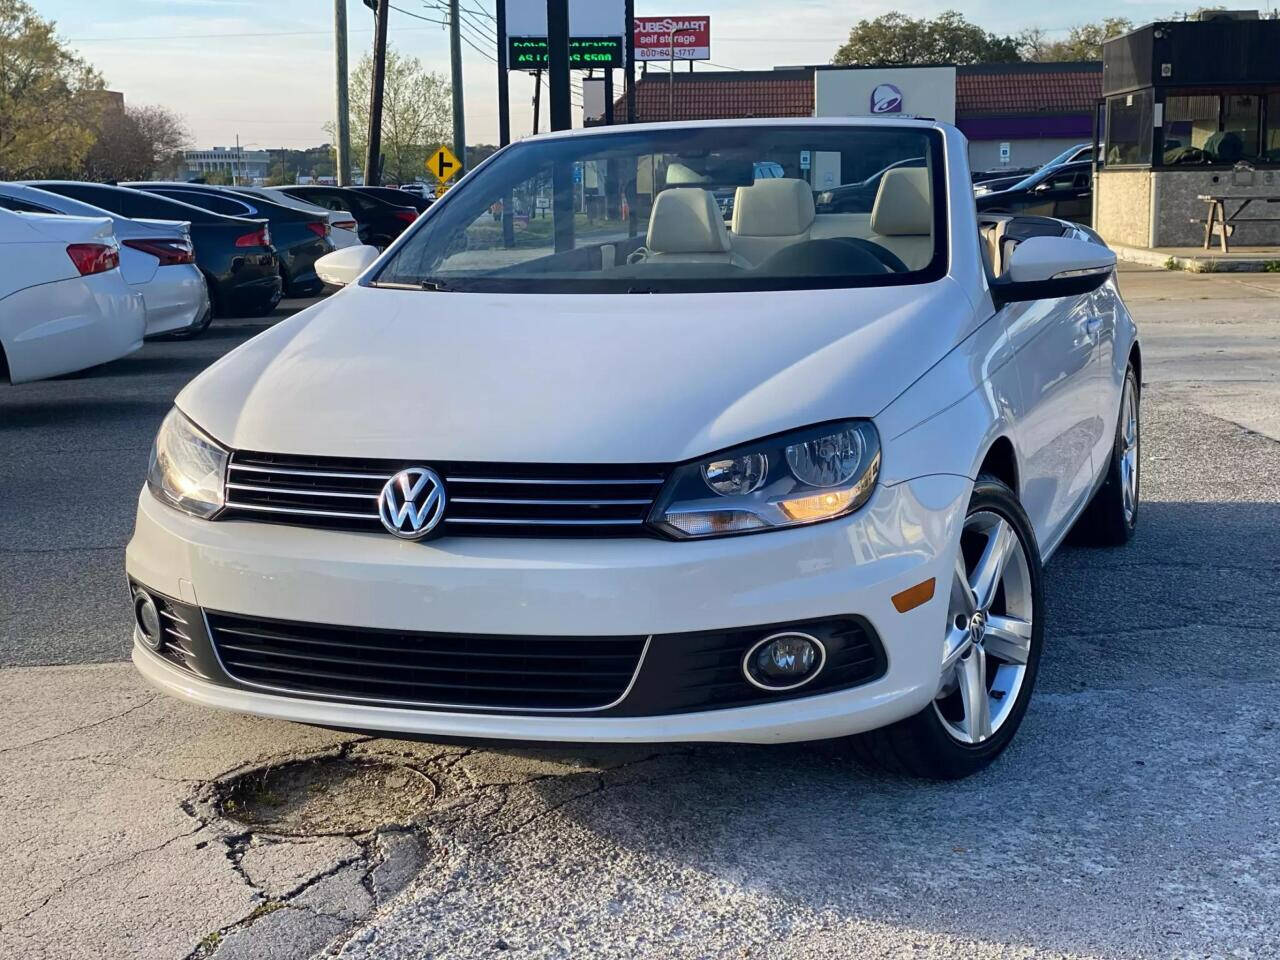 Volkswagen Eos For Sale In Richmond Hill, NY - ®